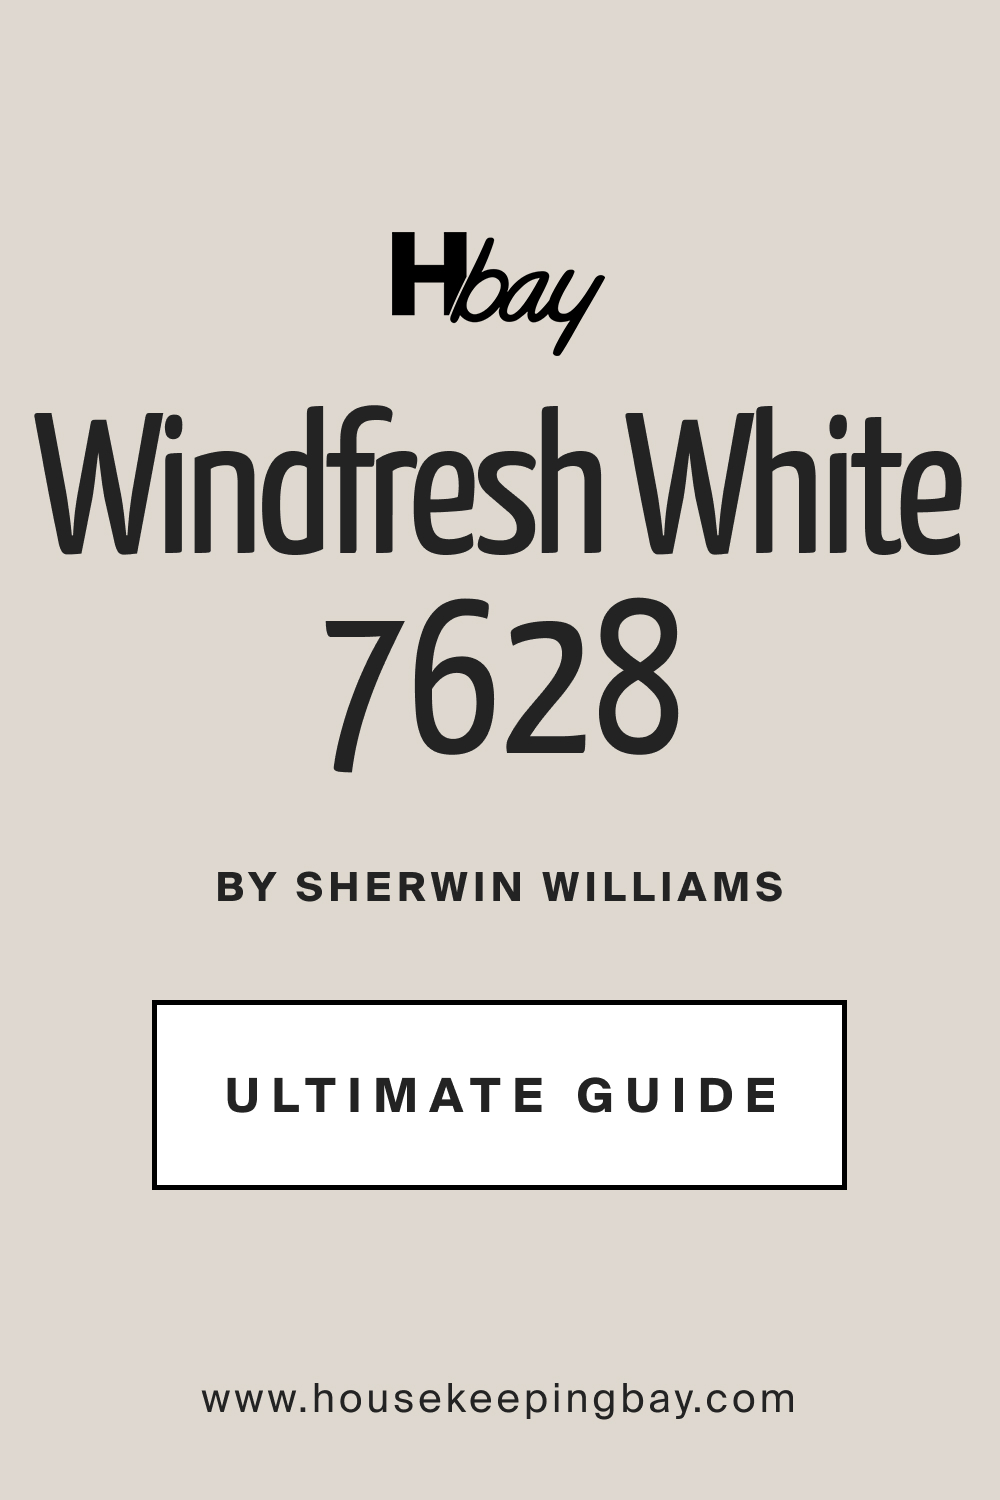 SW 7628 Windfresh White by Sherwin Williams Ultimate Guide